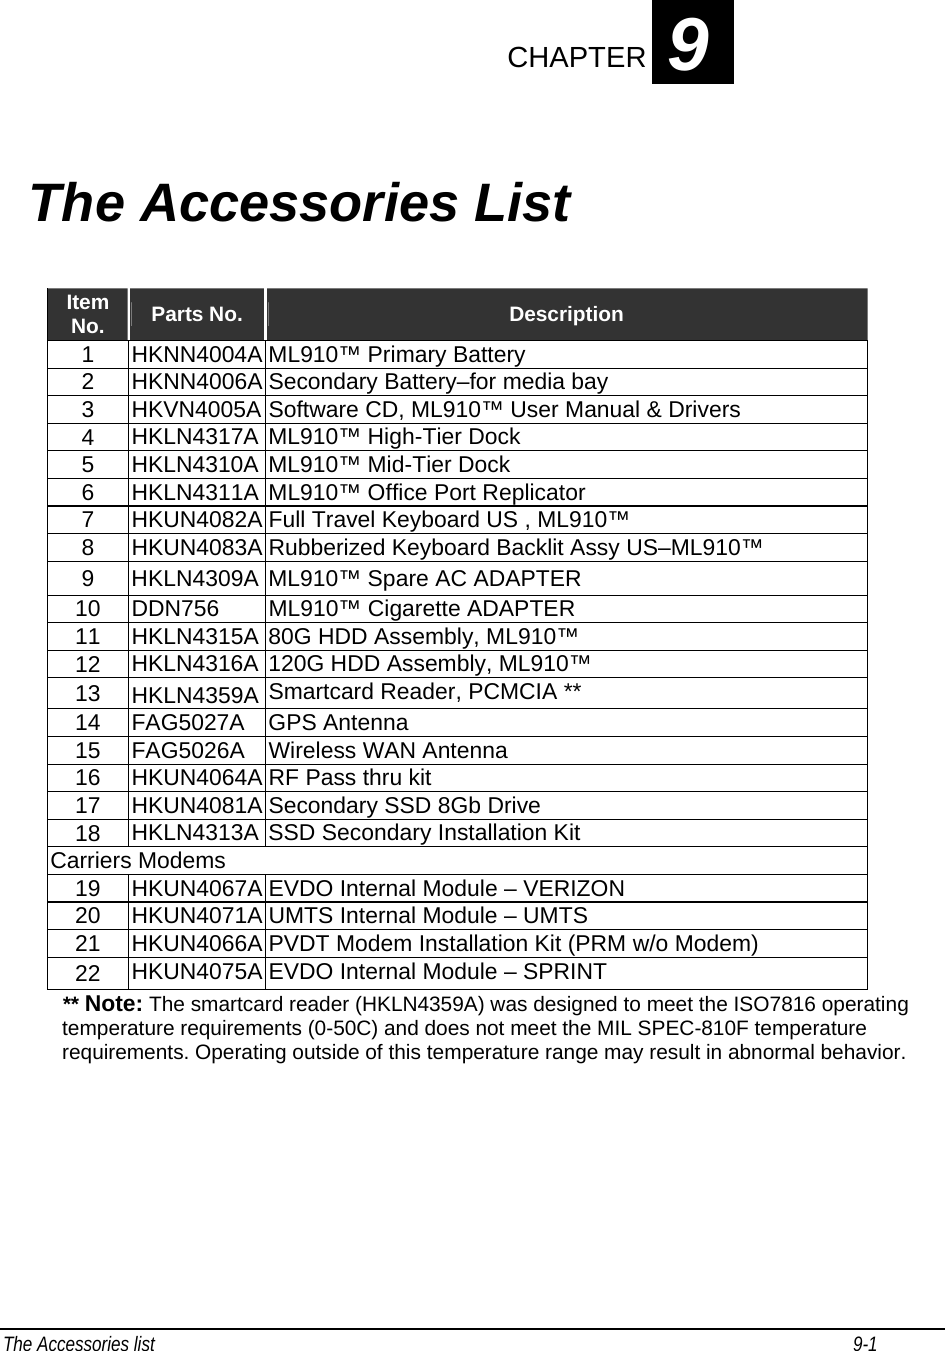 The Accessories list                                                                                                                                                   9-1    CHAPTER 9 The Accessories List  Item No.  Parts No.  Description 1  HKNN4004A ML910™ Primary Battery 2  HKNN4006A Secondary Battery–for media bay 3  HKVN4005A Software CD, ML910™ User Manual &amp; Drivers 4  HKLN4317A ML910™ High-Tier Dock 5  HKLN4310A ML910™ Mid-Tier Dock 6  HKLN4311A ML910™ Office Port Replicator 7  HKUN4082A Full Travel Keyboard US , ML910™ 8  HKUN4083A Rubberized Keyboard Backlit Assy US–ML910™ 9  HKLN4309A ML910™ Spare AC ADAPTER  10  DDN756  ML910™ Cigarette ADAPTER  11  HKLN4315A 80G HDD Assembly, ML910™ 12  HKLN4316A 120G HDD Assembly, ML910™ 13  HKLN4359A Smartcard Reader, PCMCIA ** 14  FAG5027A GPS Antenna 15  FAG5026A  Wireless WAN Antenna 16  HKUN4064A RF Pass thru kit  17  HKUN4081A Secondary SSD 8Gb Drive 18  HKLN4313A SSD Secondary Installation Kit Carriers Modems     19  HKUN4067A EVDO Internal Module – VERIZON 20  HKUN4071A UMTS Internal Module – UMTS  21  HKUN4066A PVDT Modem Installation Kit (PRM w/o Modem) 22  HKUN4075A EVDO Internal Module – SPRINT ** Note: The smartcard reader (HKLN4359A) was designed to meet the ISO7816 operating temperature requirements (0-50C) and does not meet the MIL SPEC-810F temperature requirements. Operating outside of this temperature range may result in abnormal behavior. 